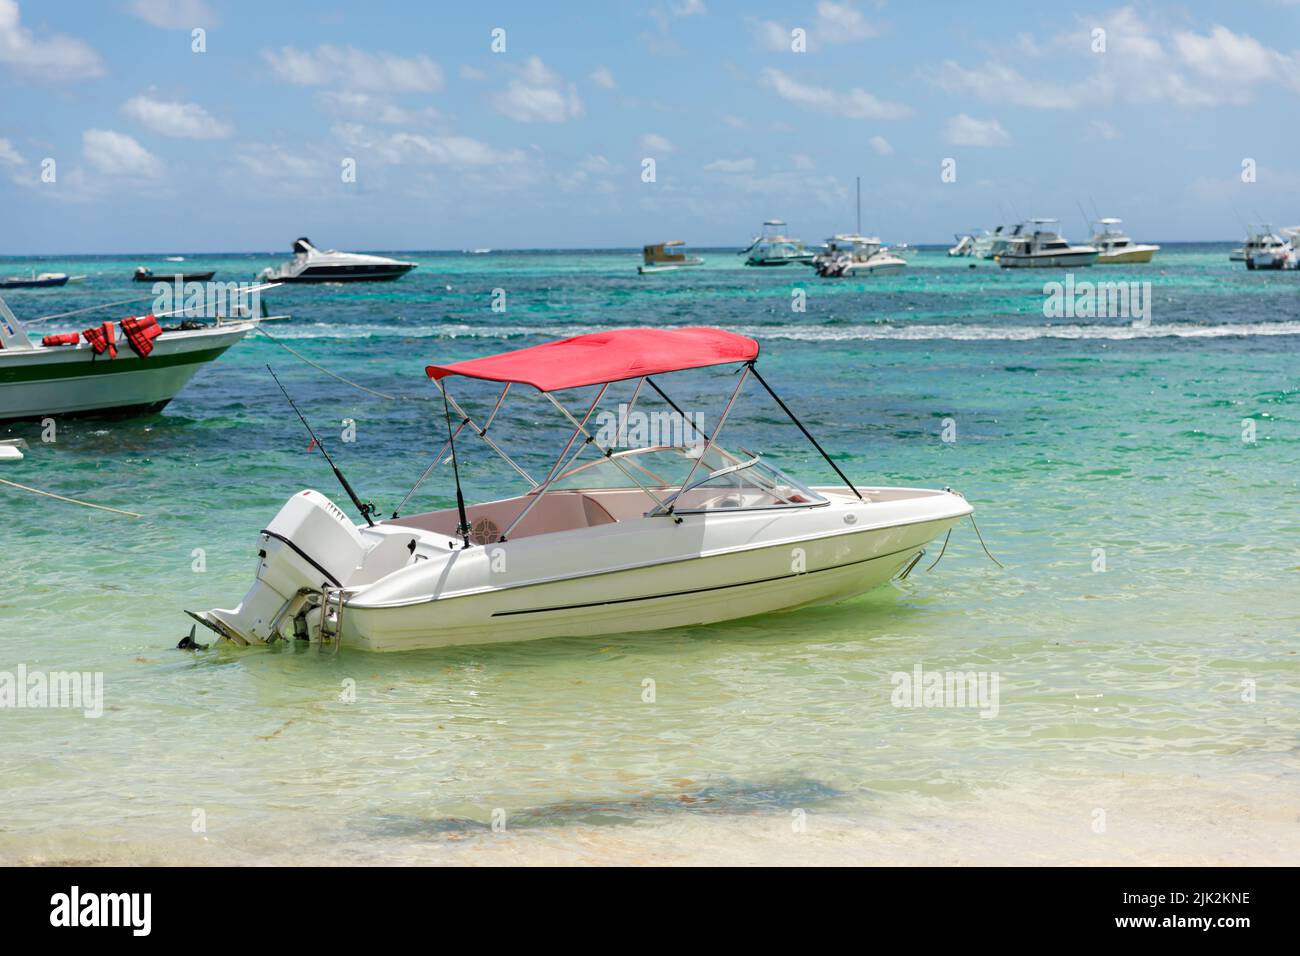 A motorboat parked on the Caribbean coast. Tourism business in the tropics, Stock Photo